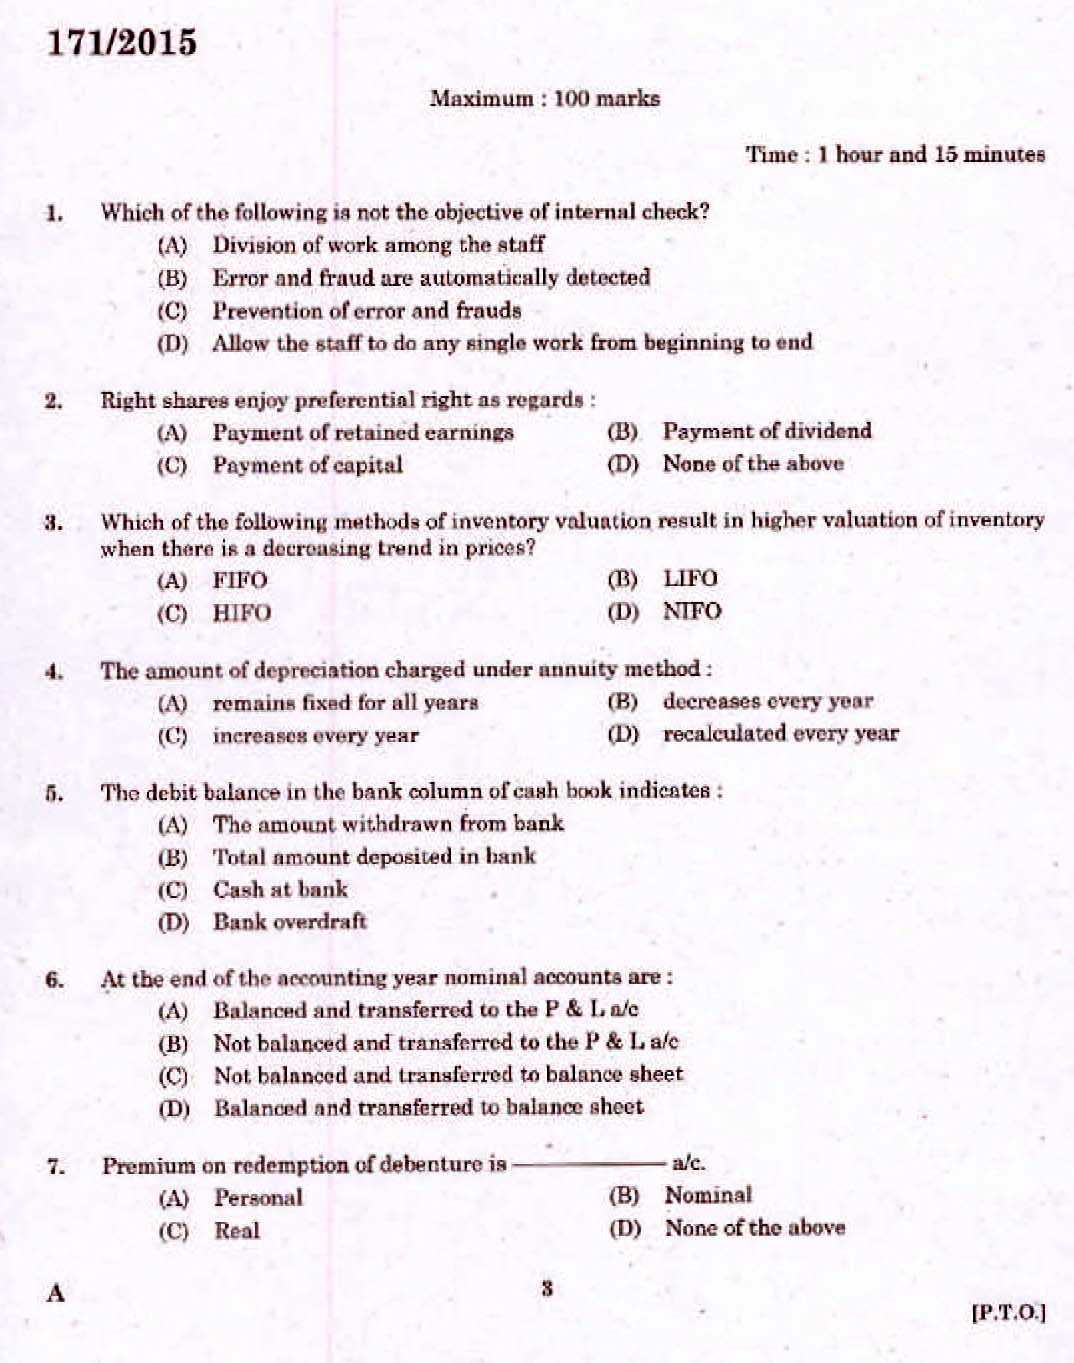 Kerala PSC Lower Division Accountant OMR Exam 2015 Question Paper Code 1712015 1